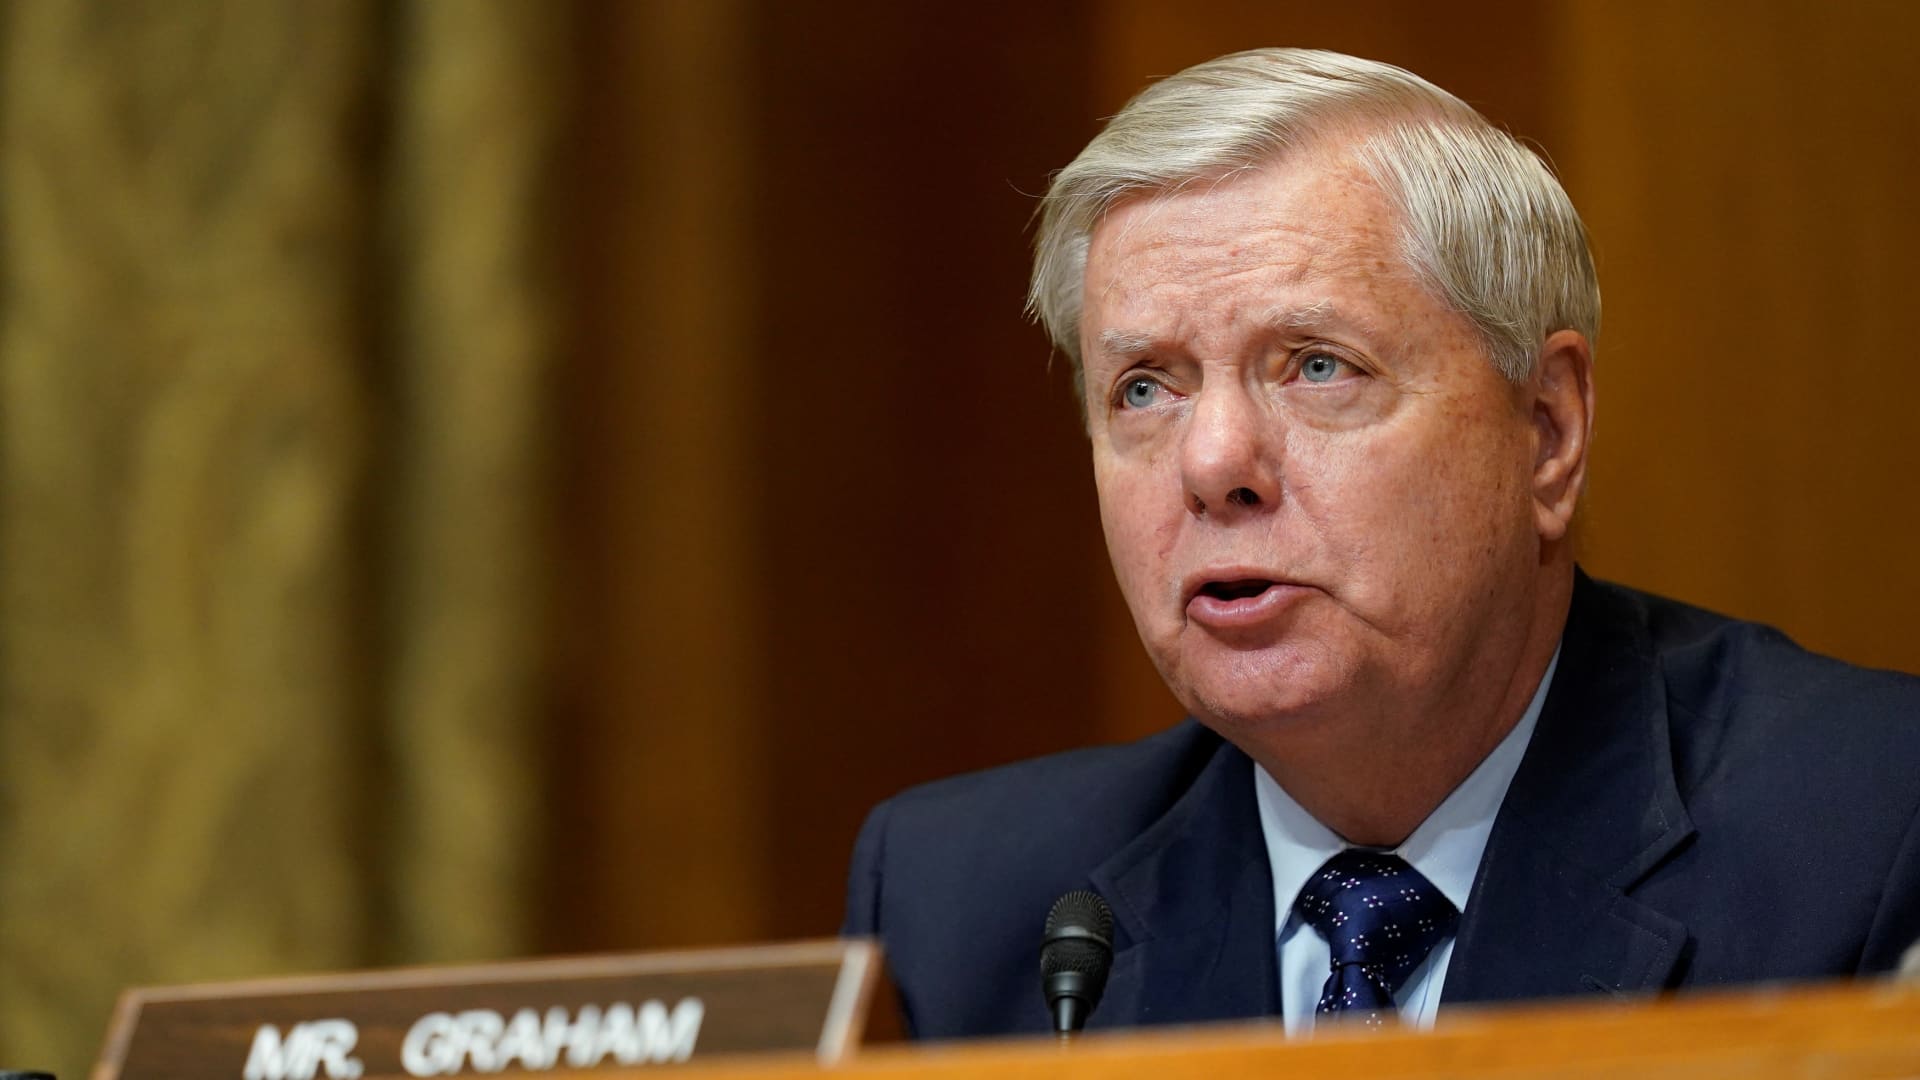 Senate Budget Committee ranking member Sen. Lindsey Graham, R-S.C., speaks during a hearing examining wages at large profitable corporations on Capitol Hill in Washington, U.S. February 25, 2021.